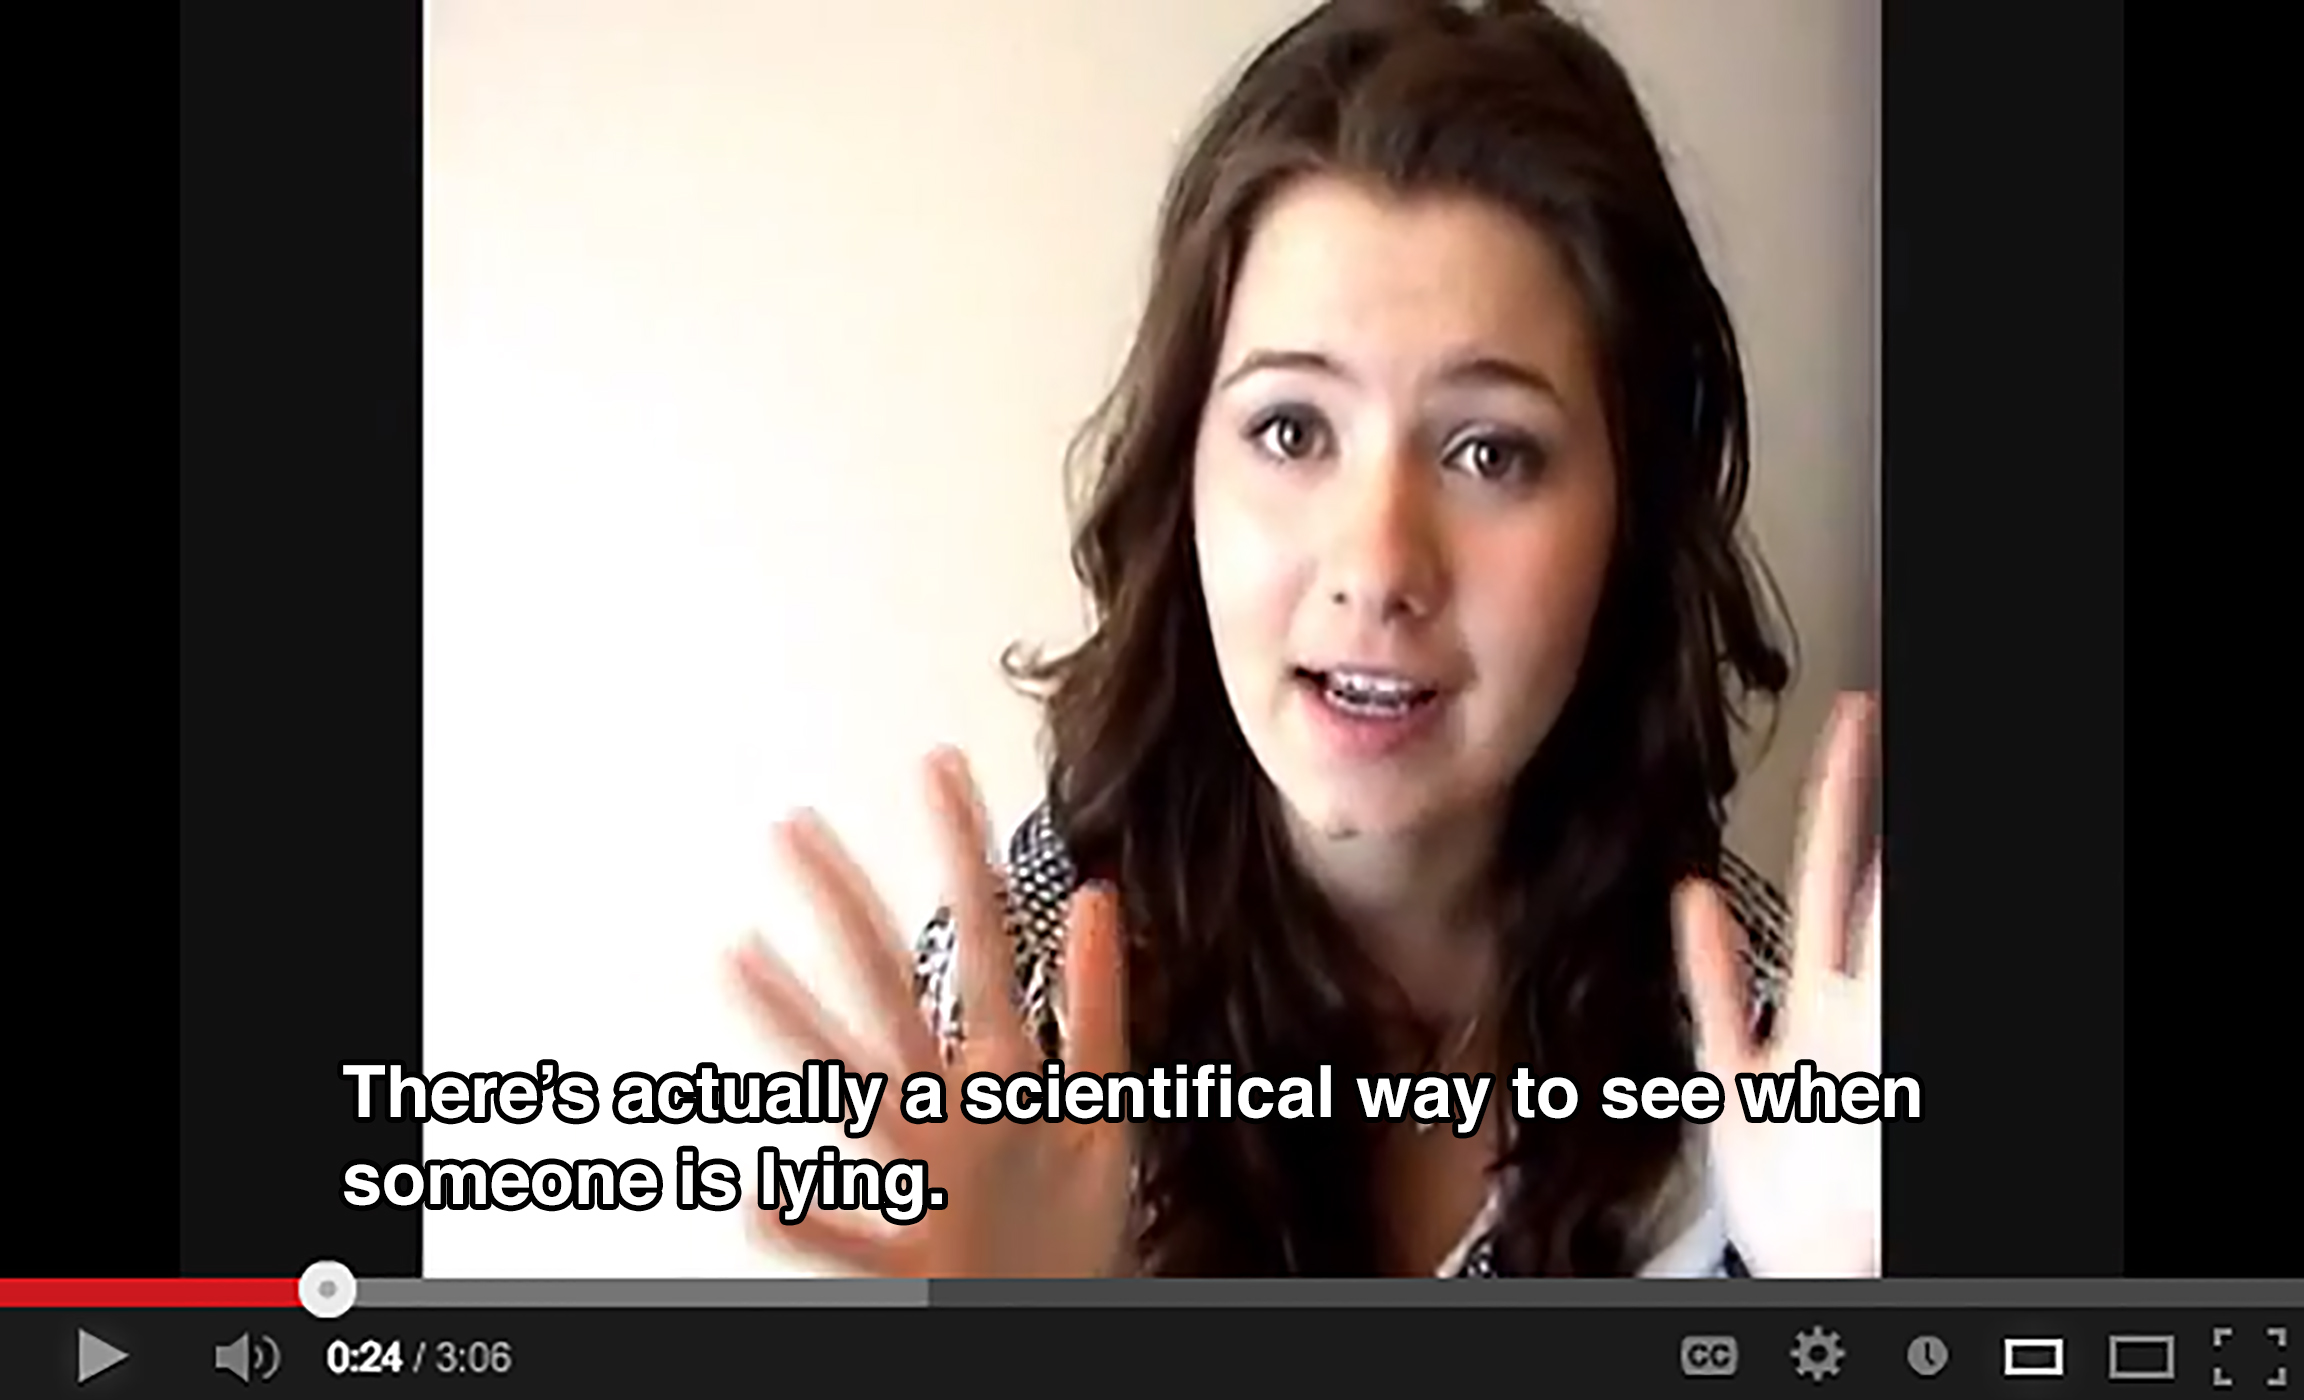 A teenager gestures with her hands and says: There's actually a scientifical way to see when someone is lying.